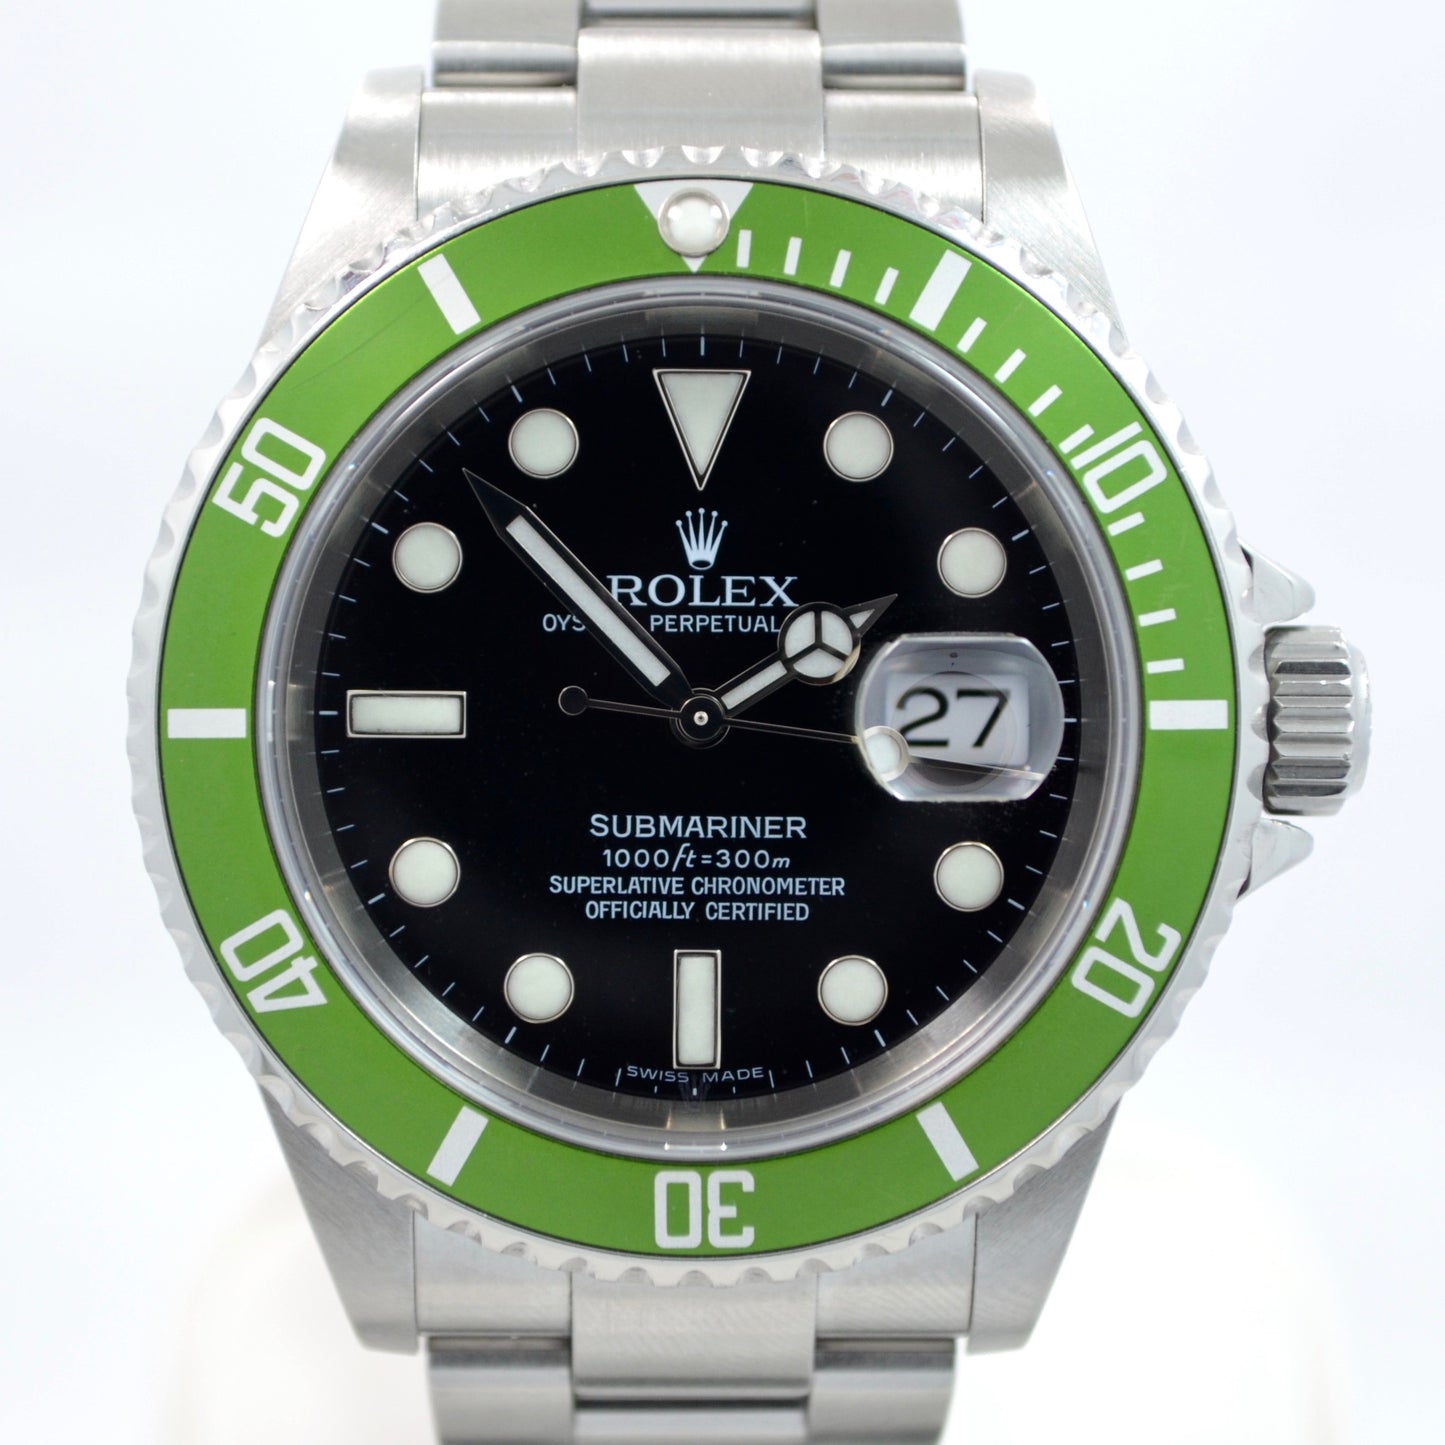 Rolex Submariner 16610LV 50th Anniversary Green "Z" Serial Steel Watch - Hashtag Watch Company